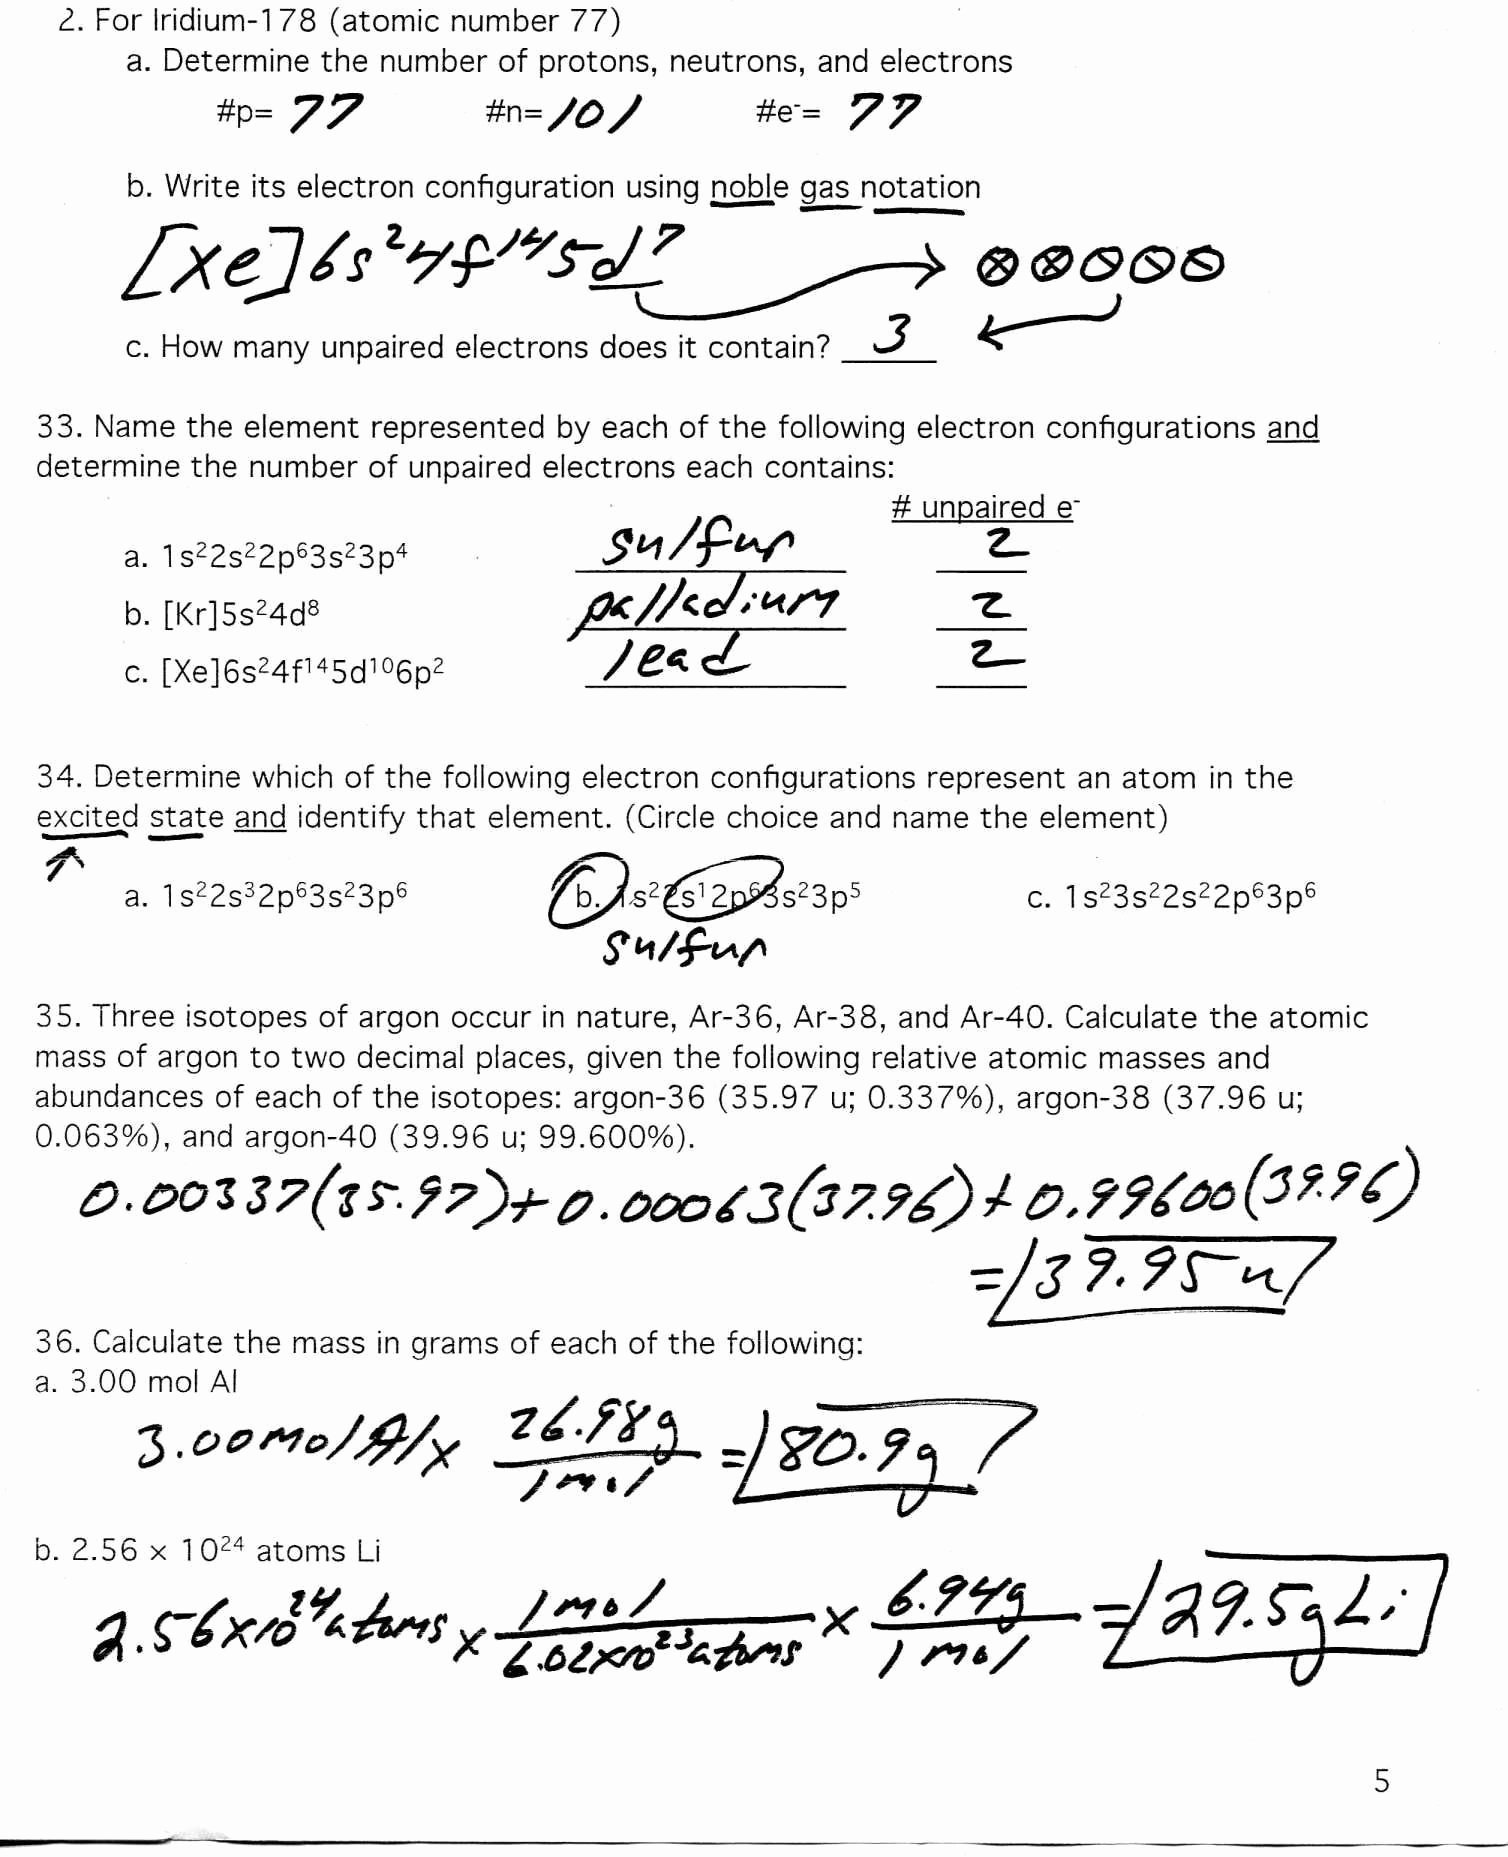 Atomic Structure Practice Worksheet Answers Fresh Protons Neutrons and Electrons Practice Worksheet Answer